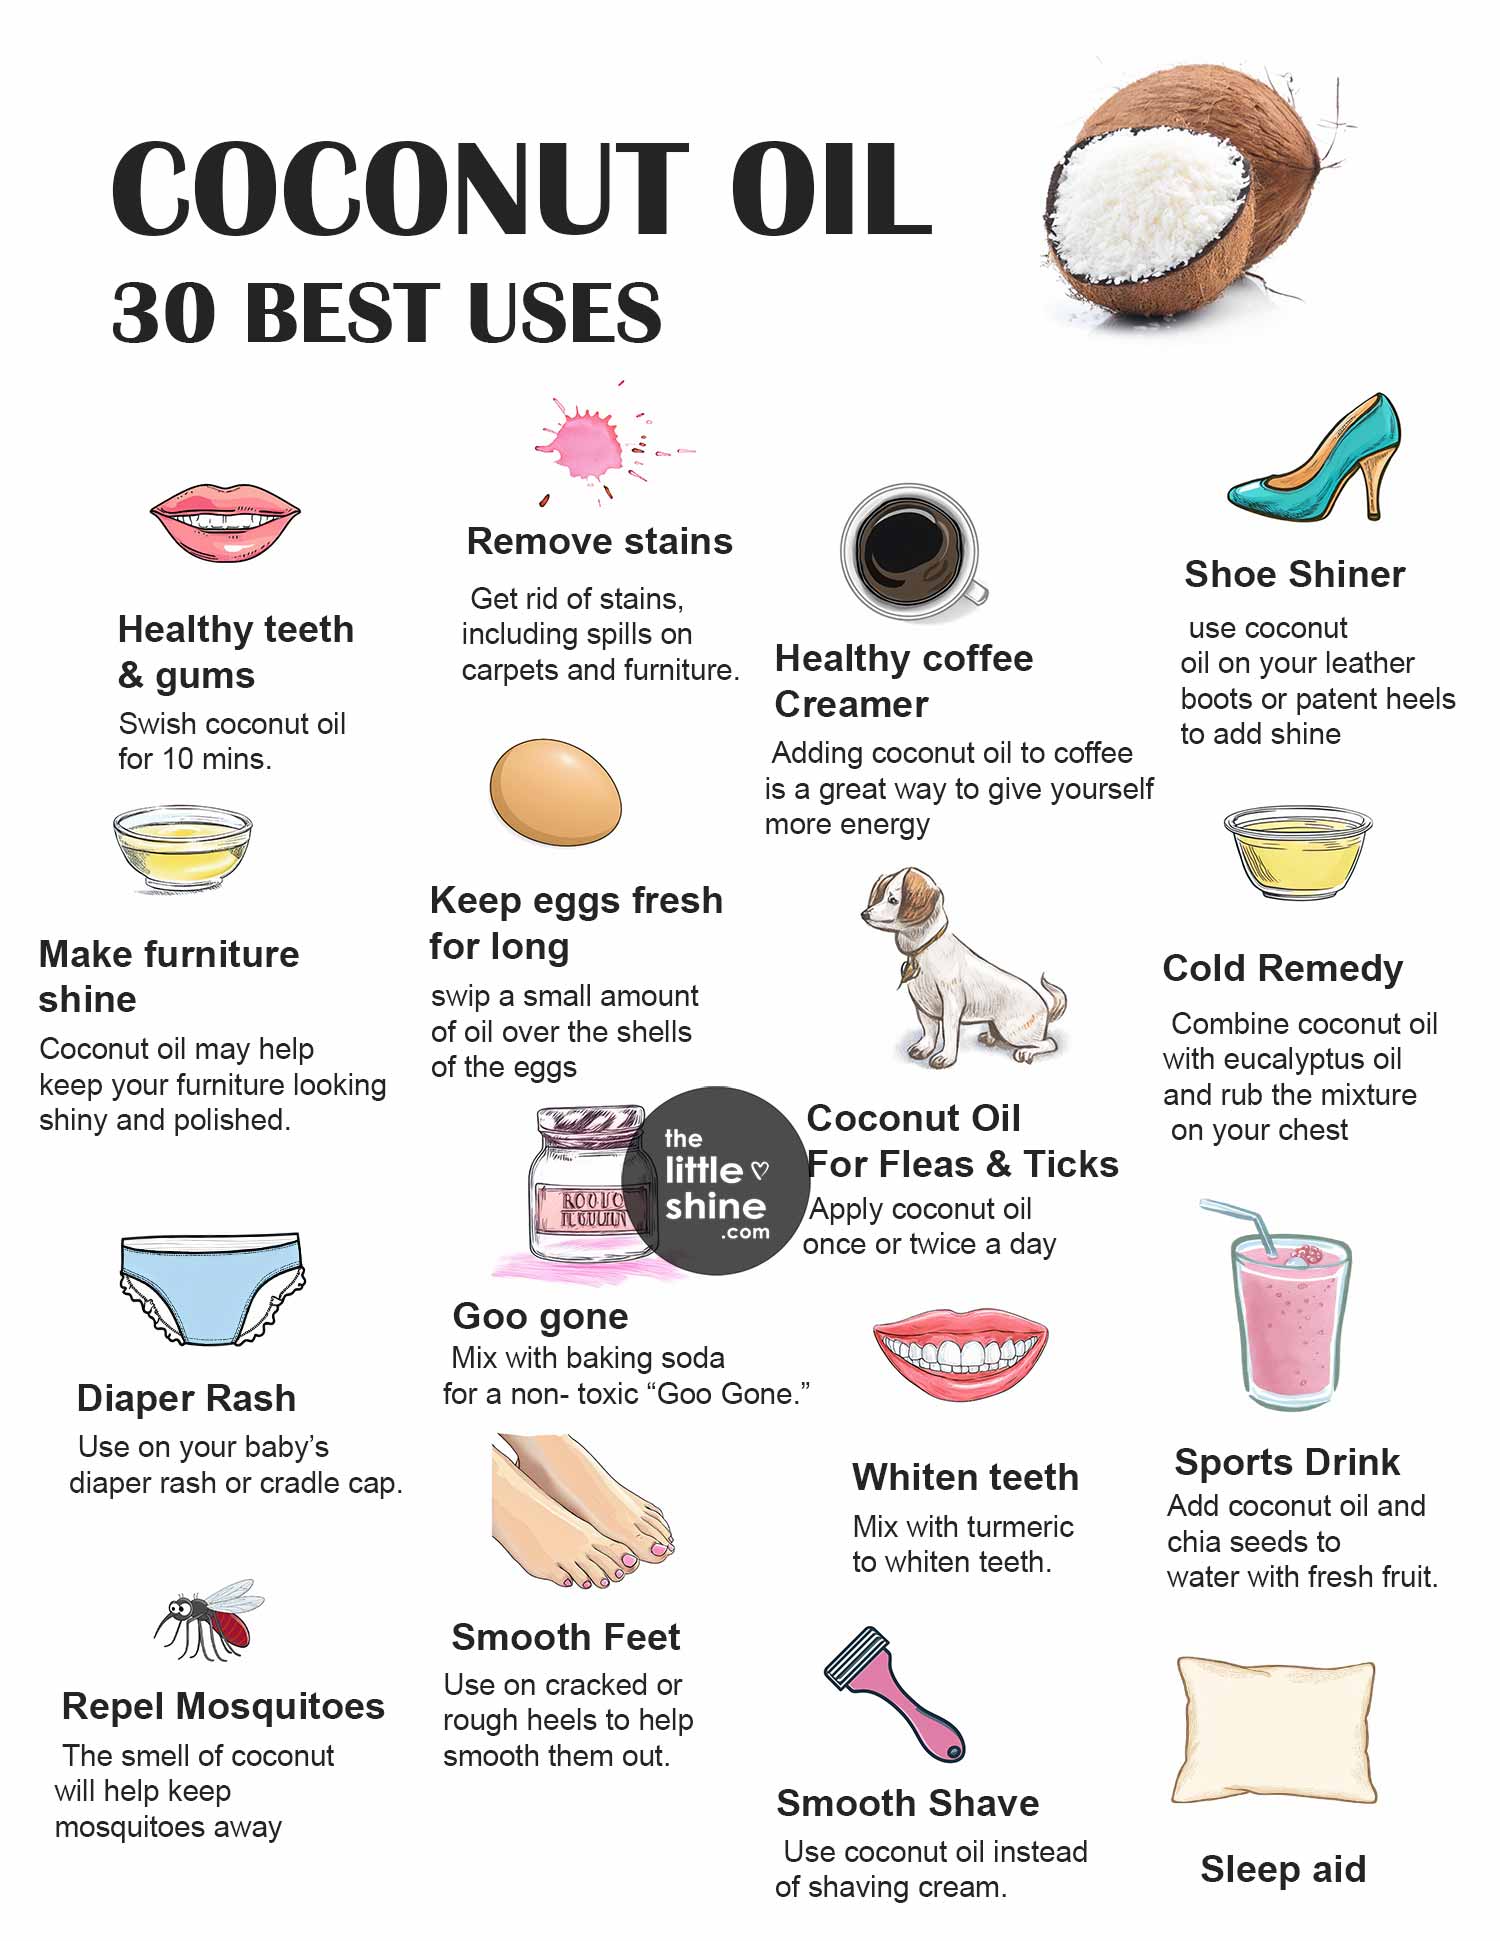 COCONUT OIL - 30 best benefits and uses for health and beauty